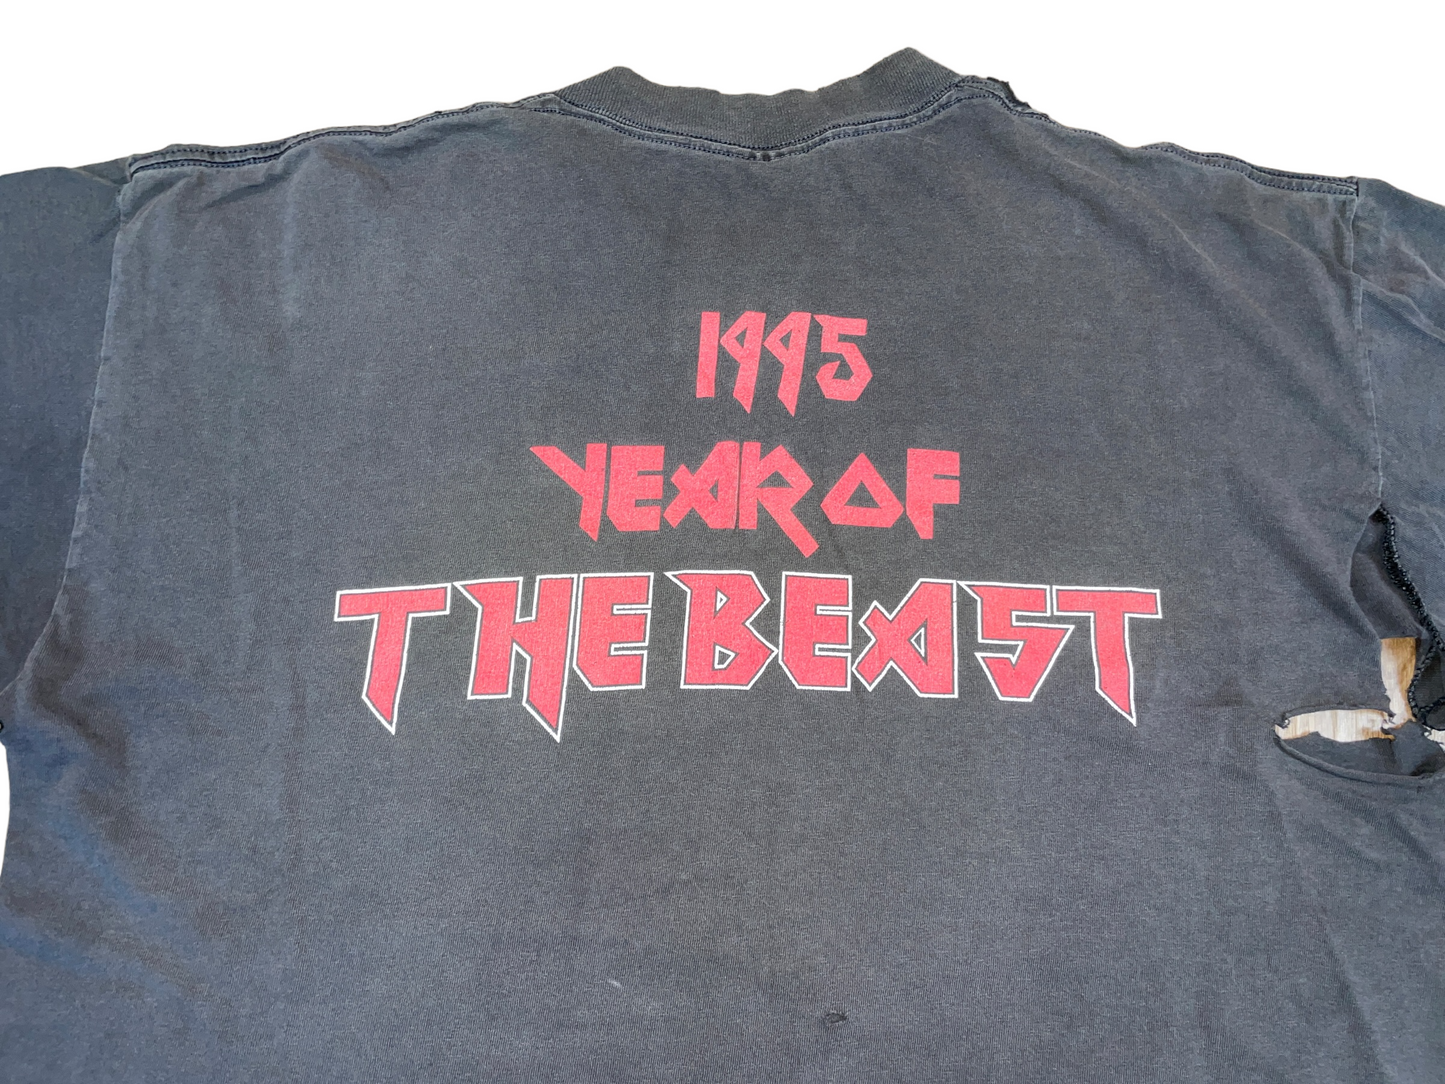 Vintage 1995 Iron Maiden Year of the Beast T-Shirt